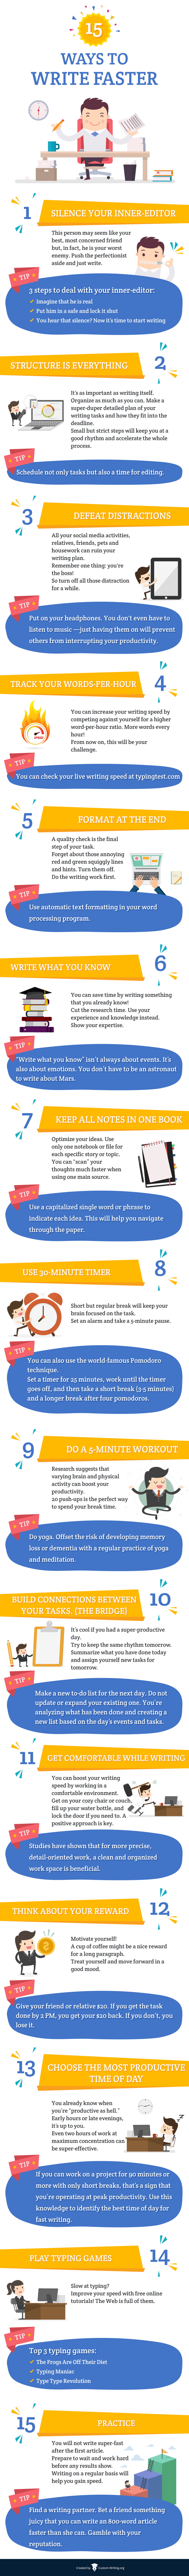 15 Tips Writing Faster [Infographic]